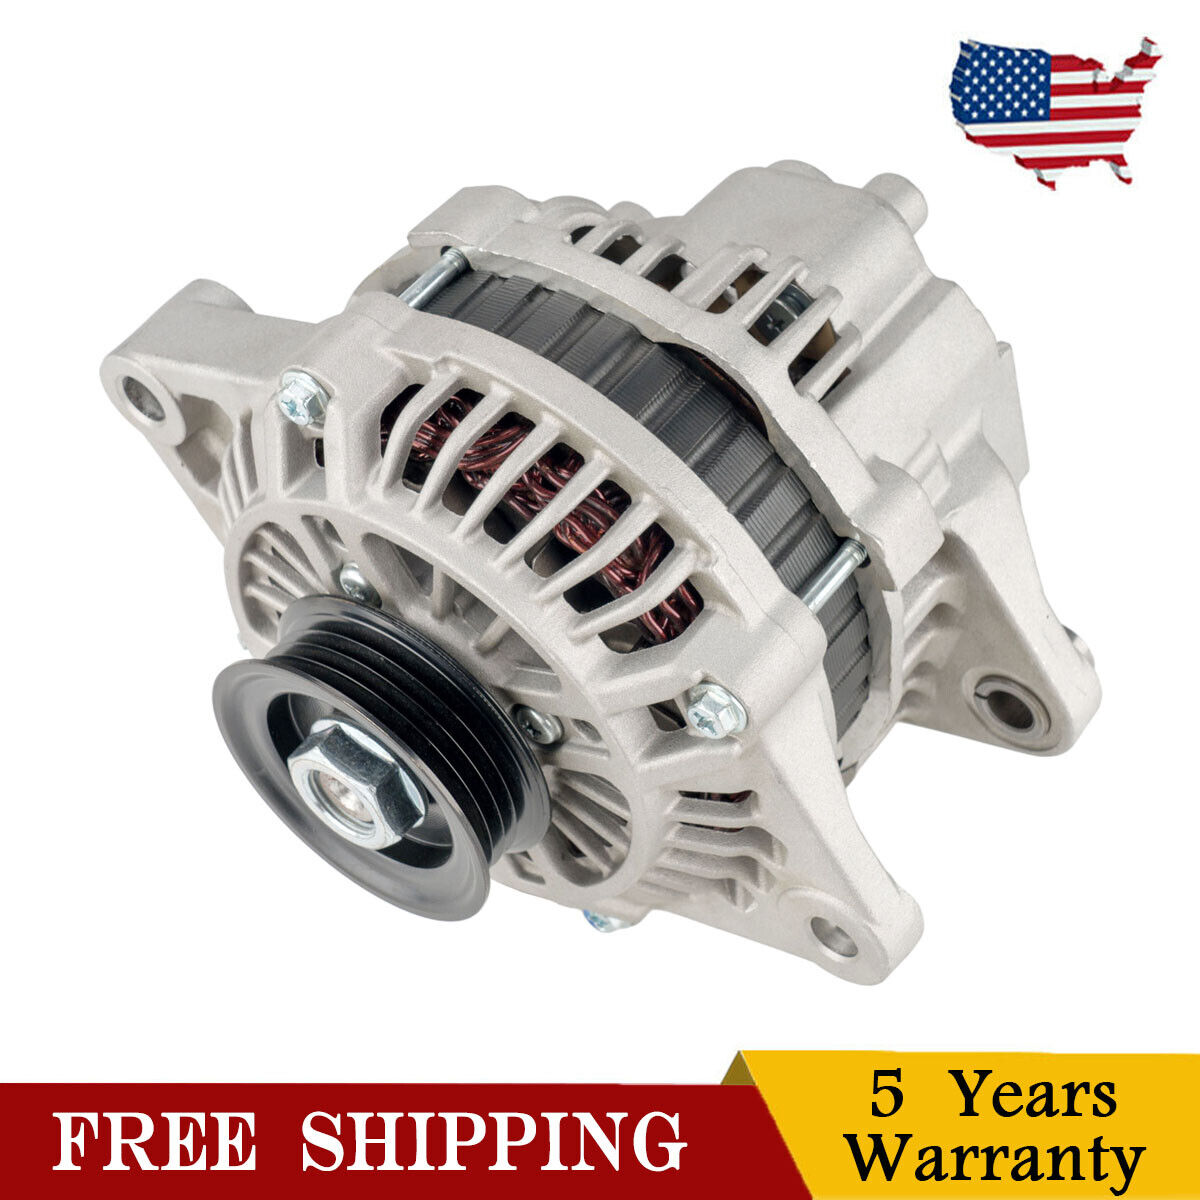 Alternator Assembly For 1998-2001 Plymouth Neon 1998-2004 Dodge Neon 13735 